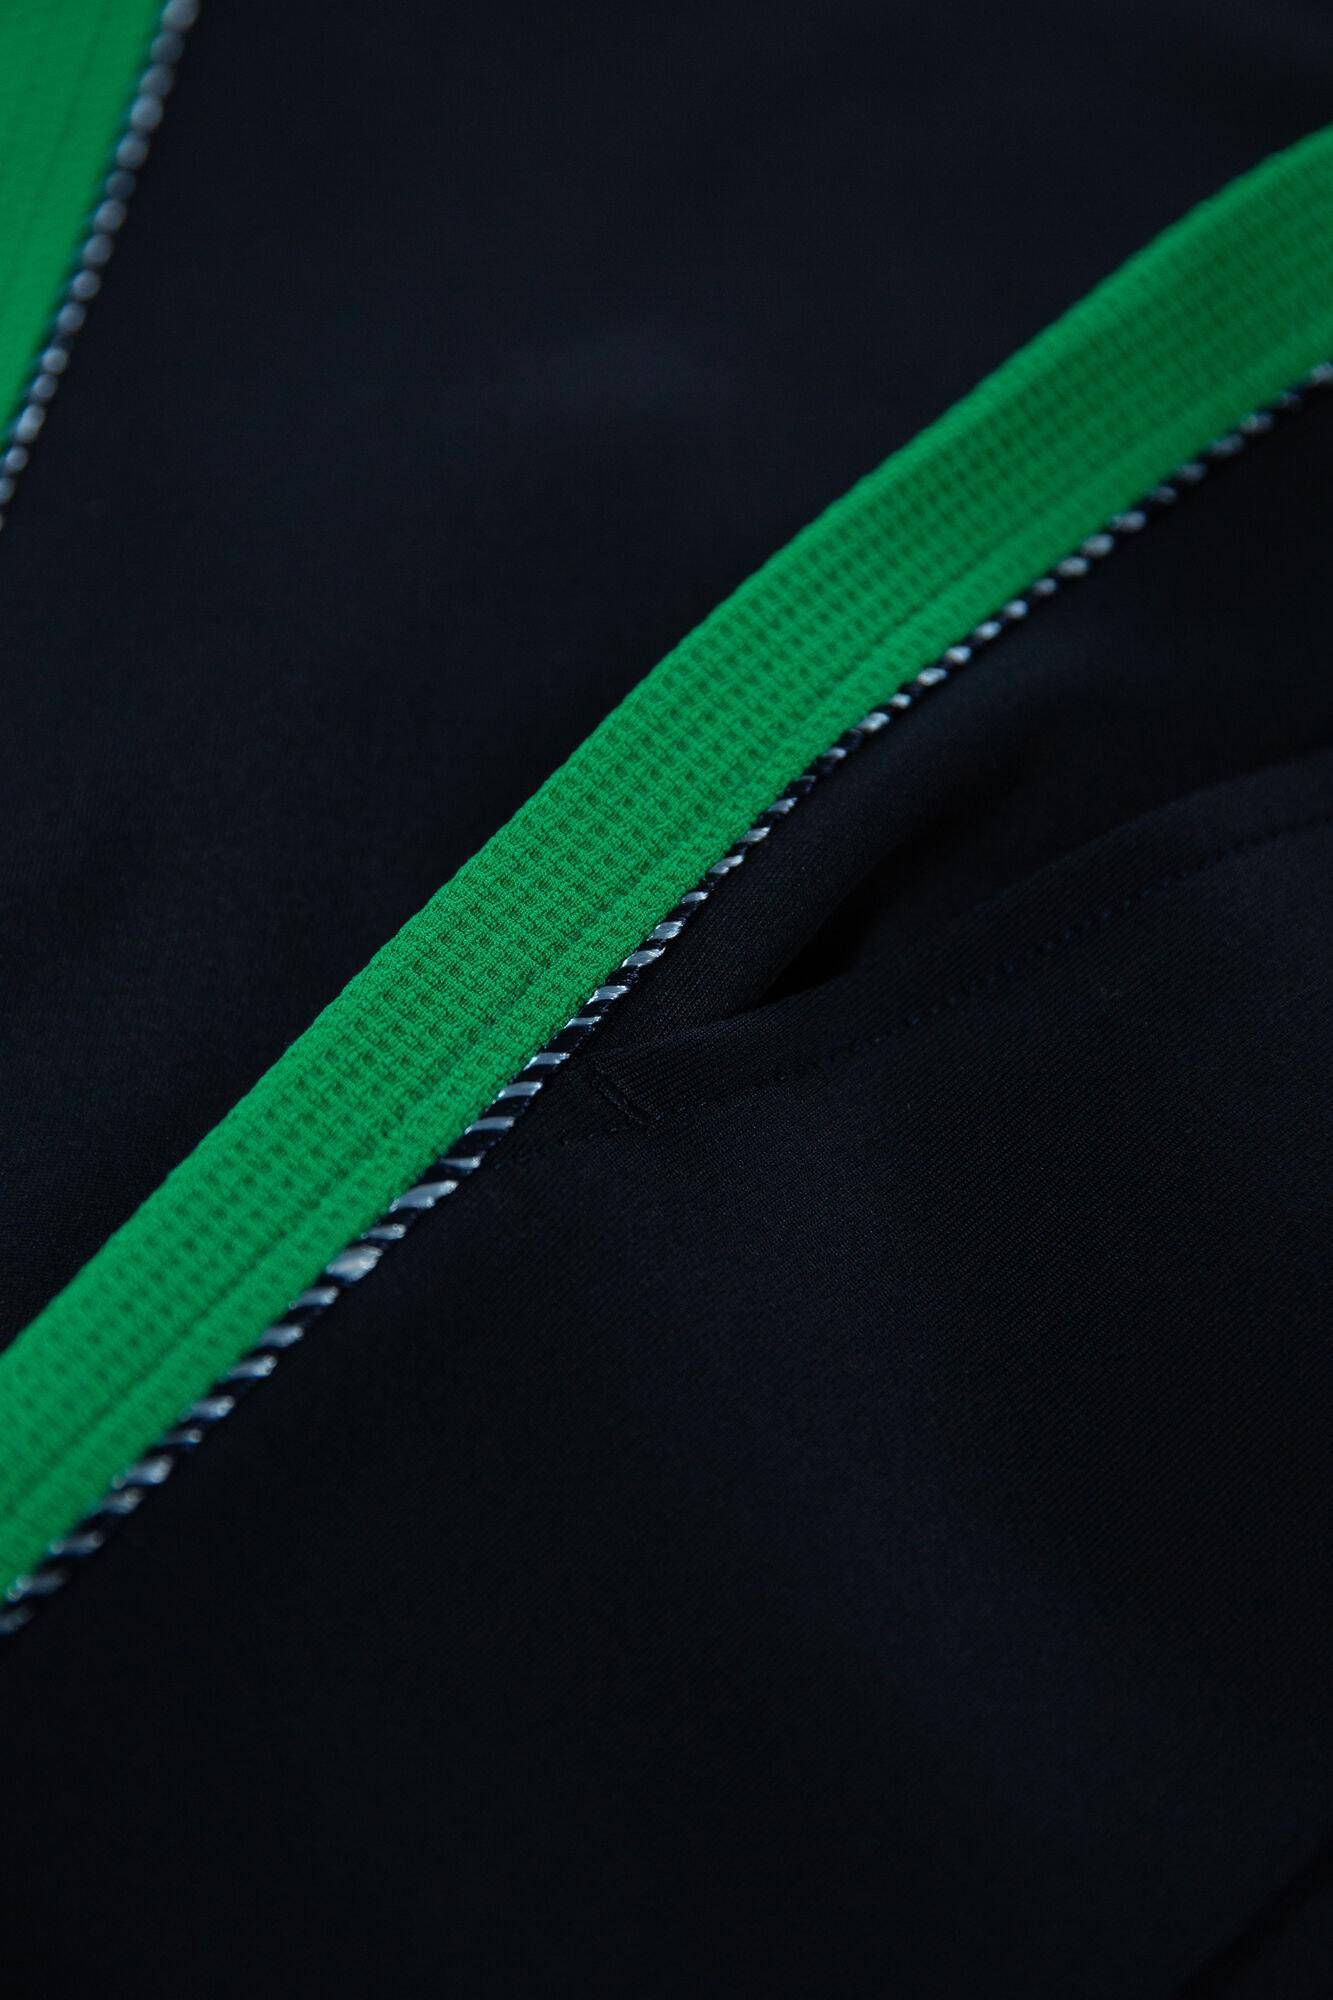 Black Garcia Trousers with Green Stripe - Your Style Your Story